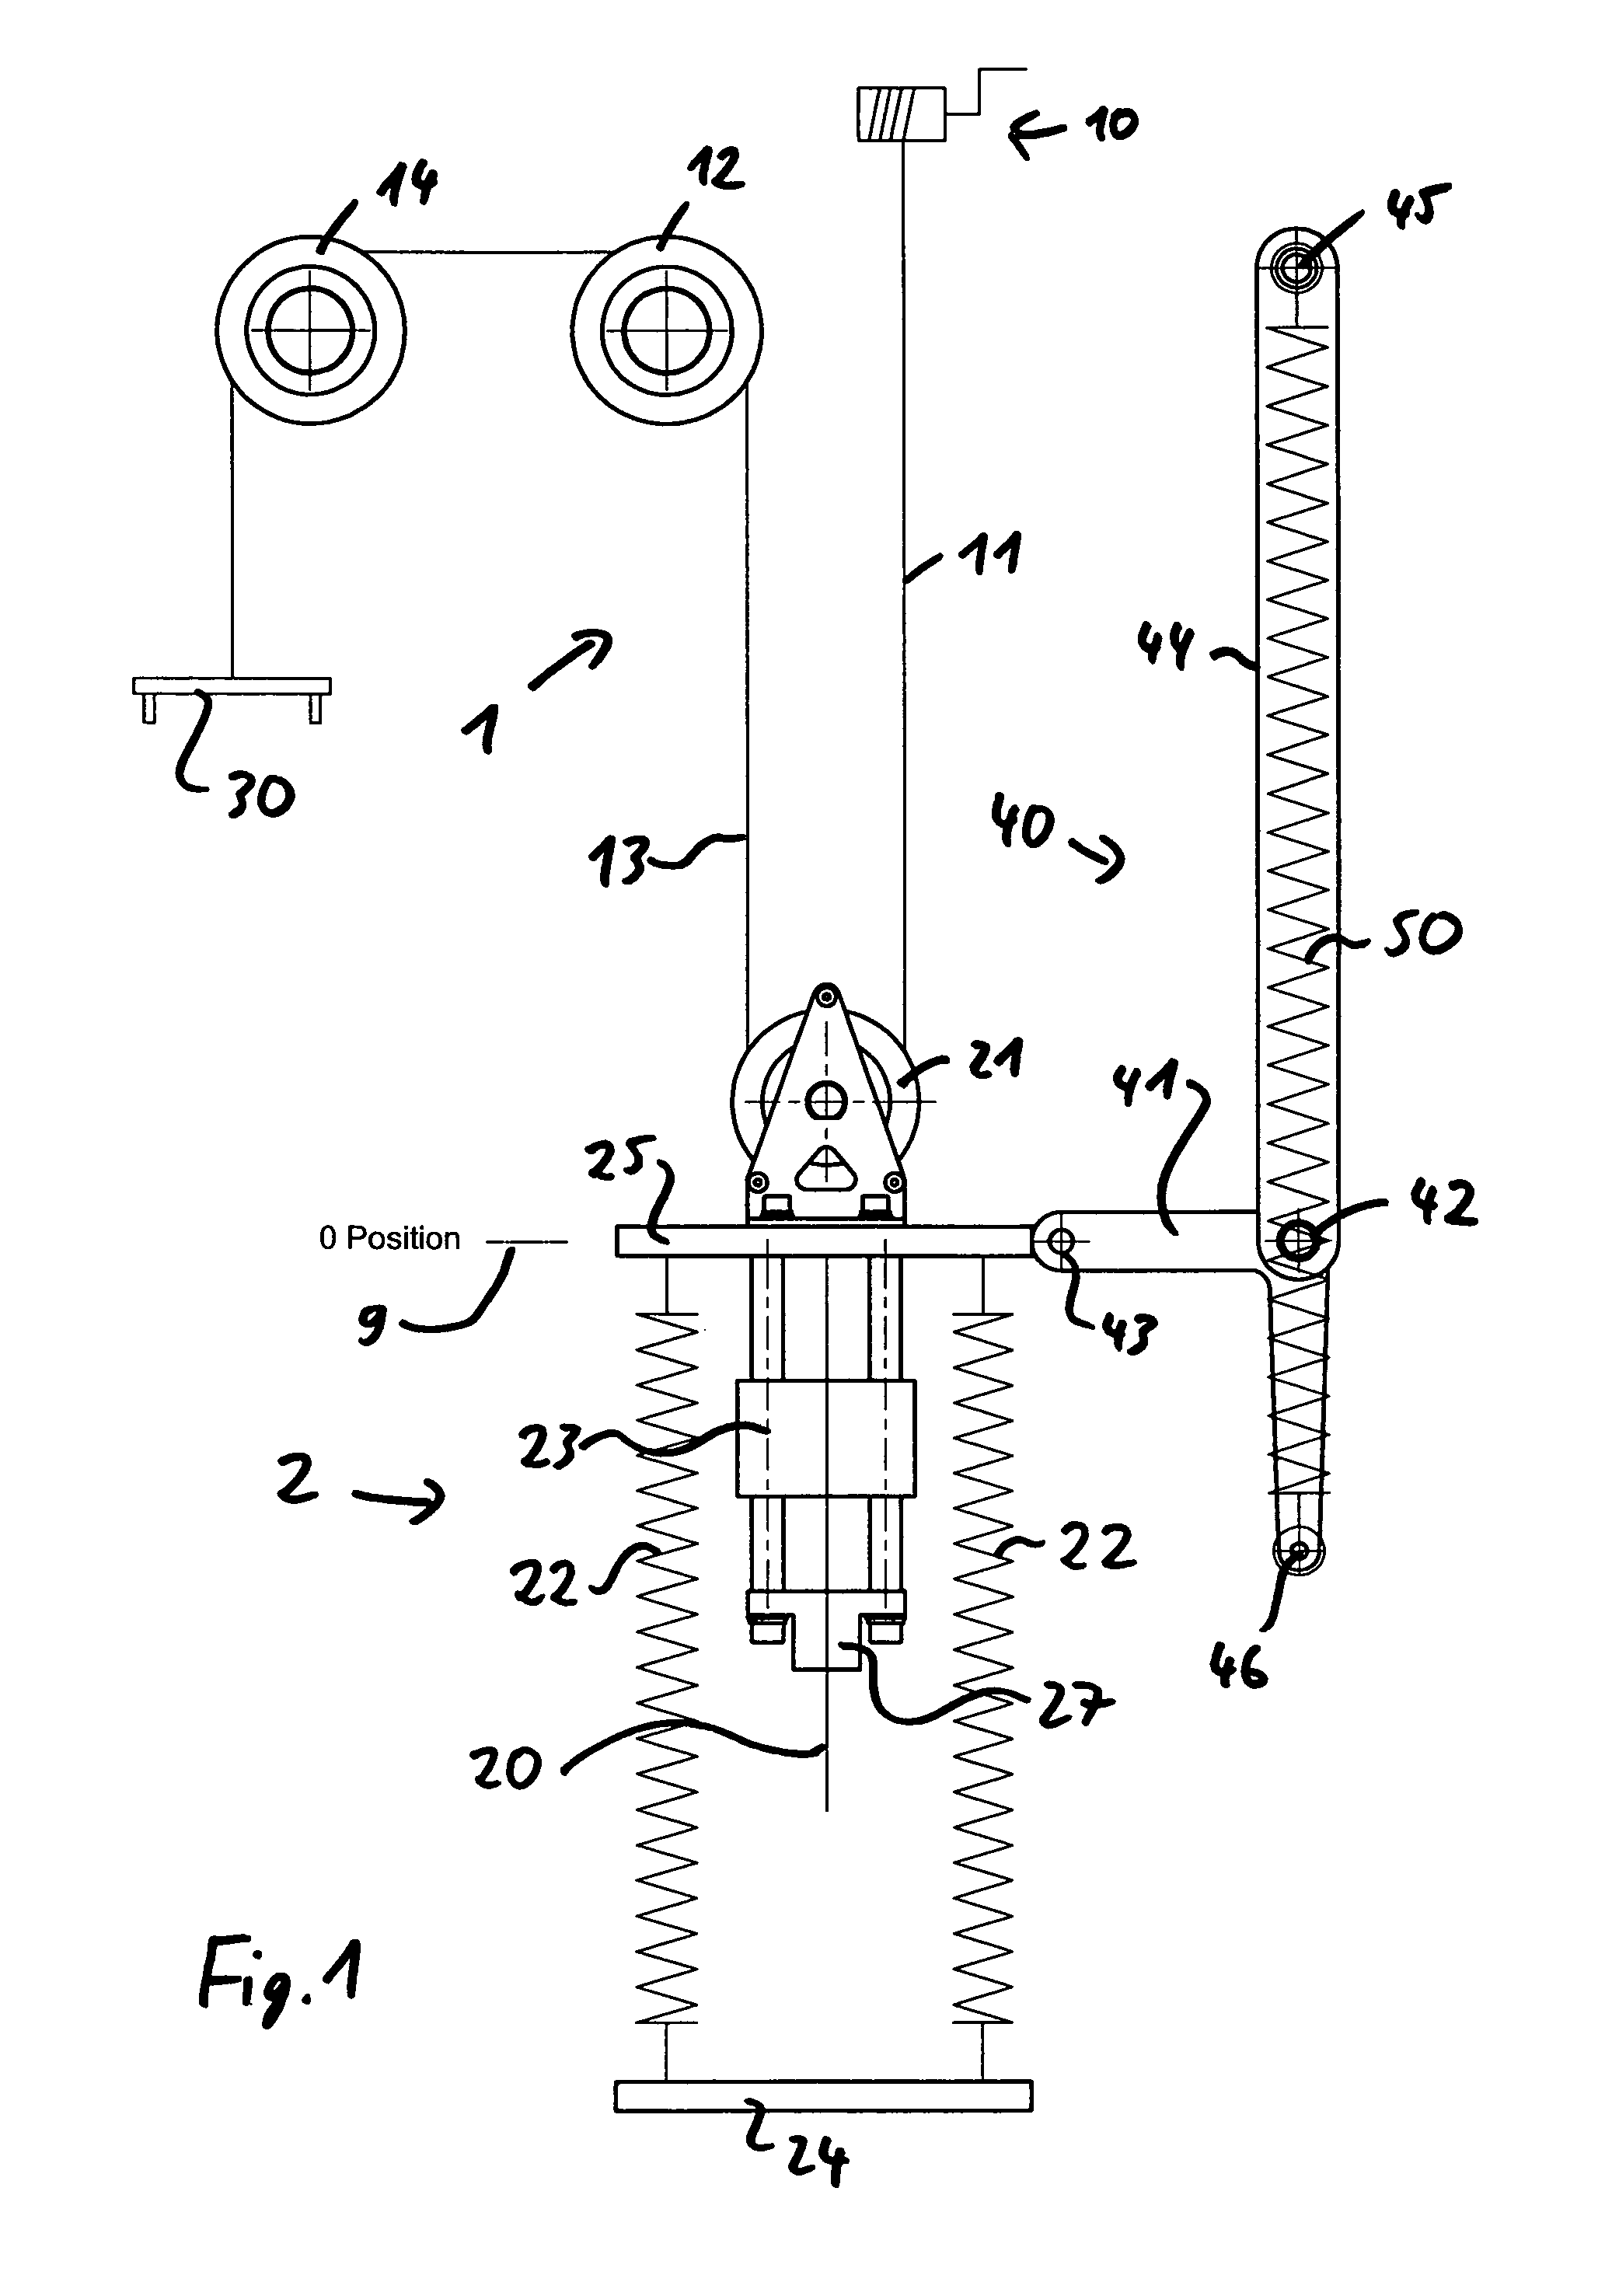 Device for adjusting the prestress of an elastic means around a predetermined tension or position